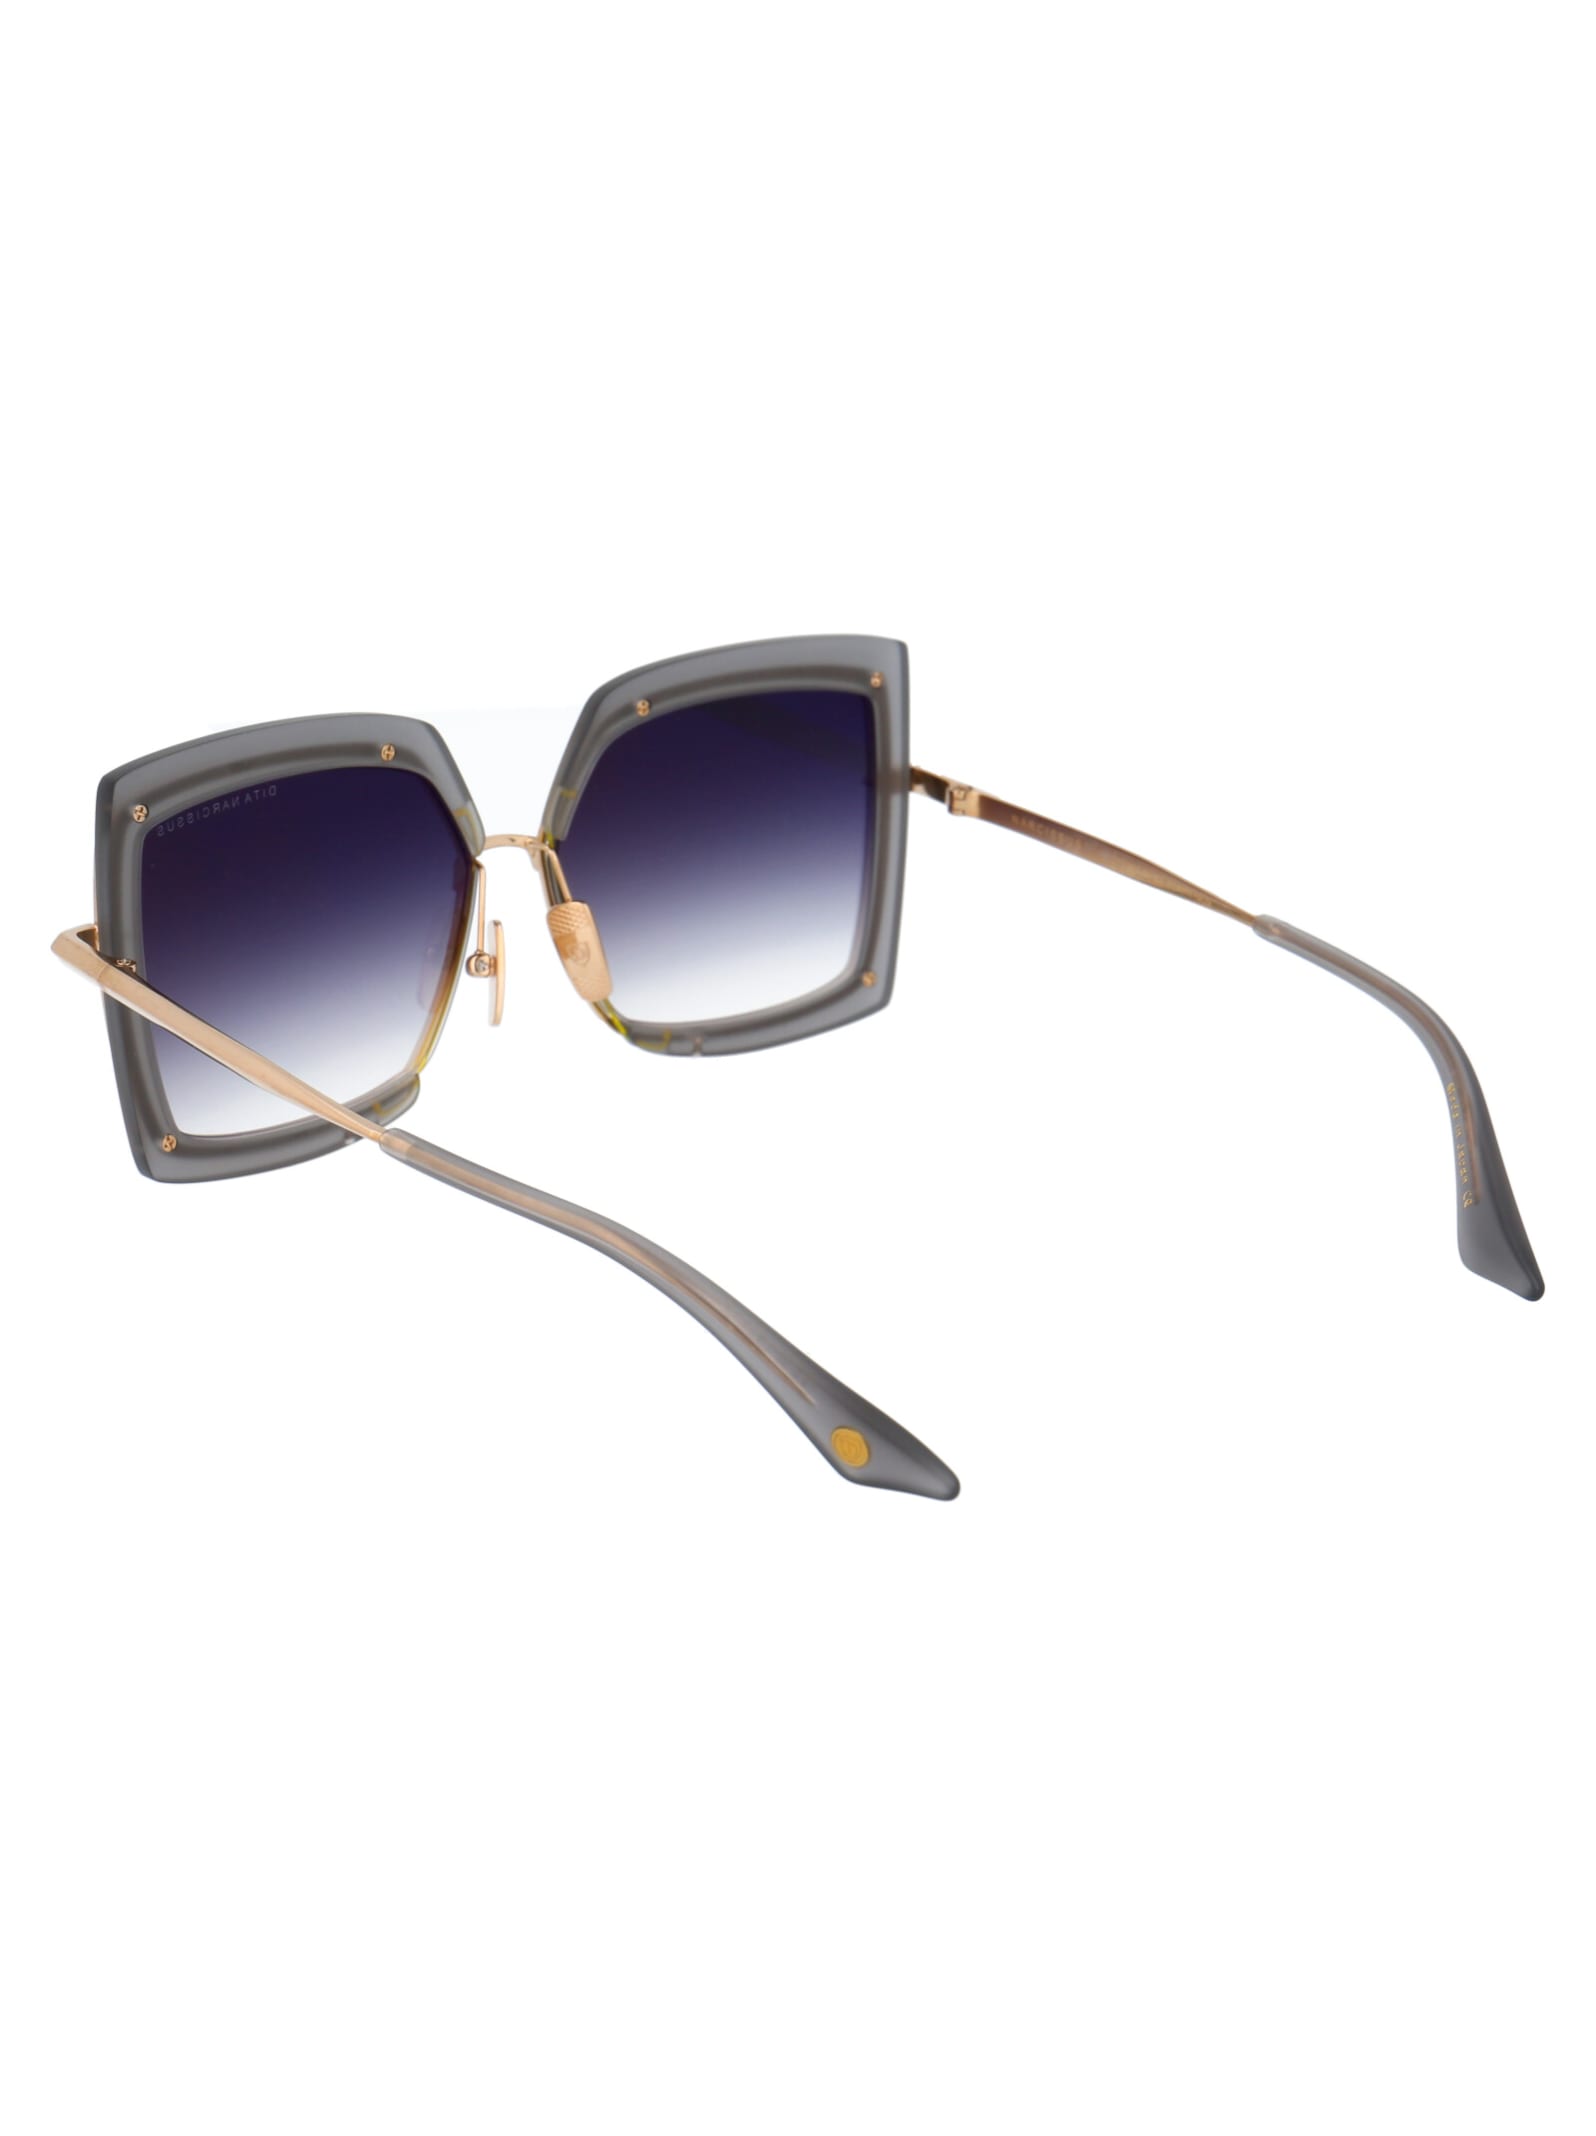 Shop Dita Narcissus Sunglasses In Satin Crystal Grey - White Gold - Milky Gold Flash